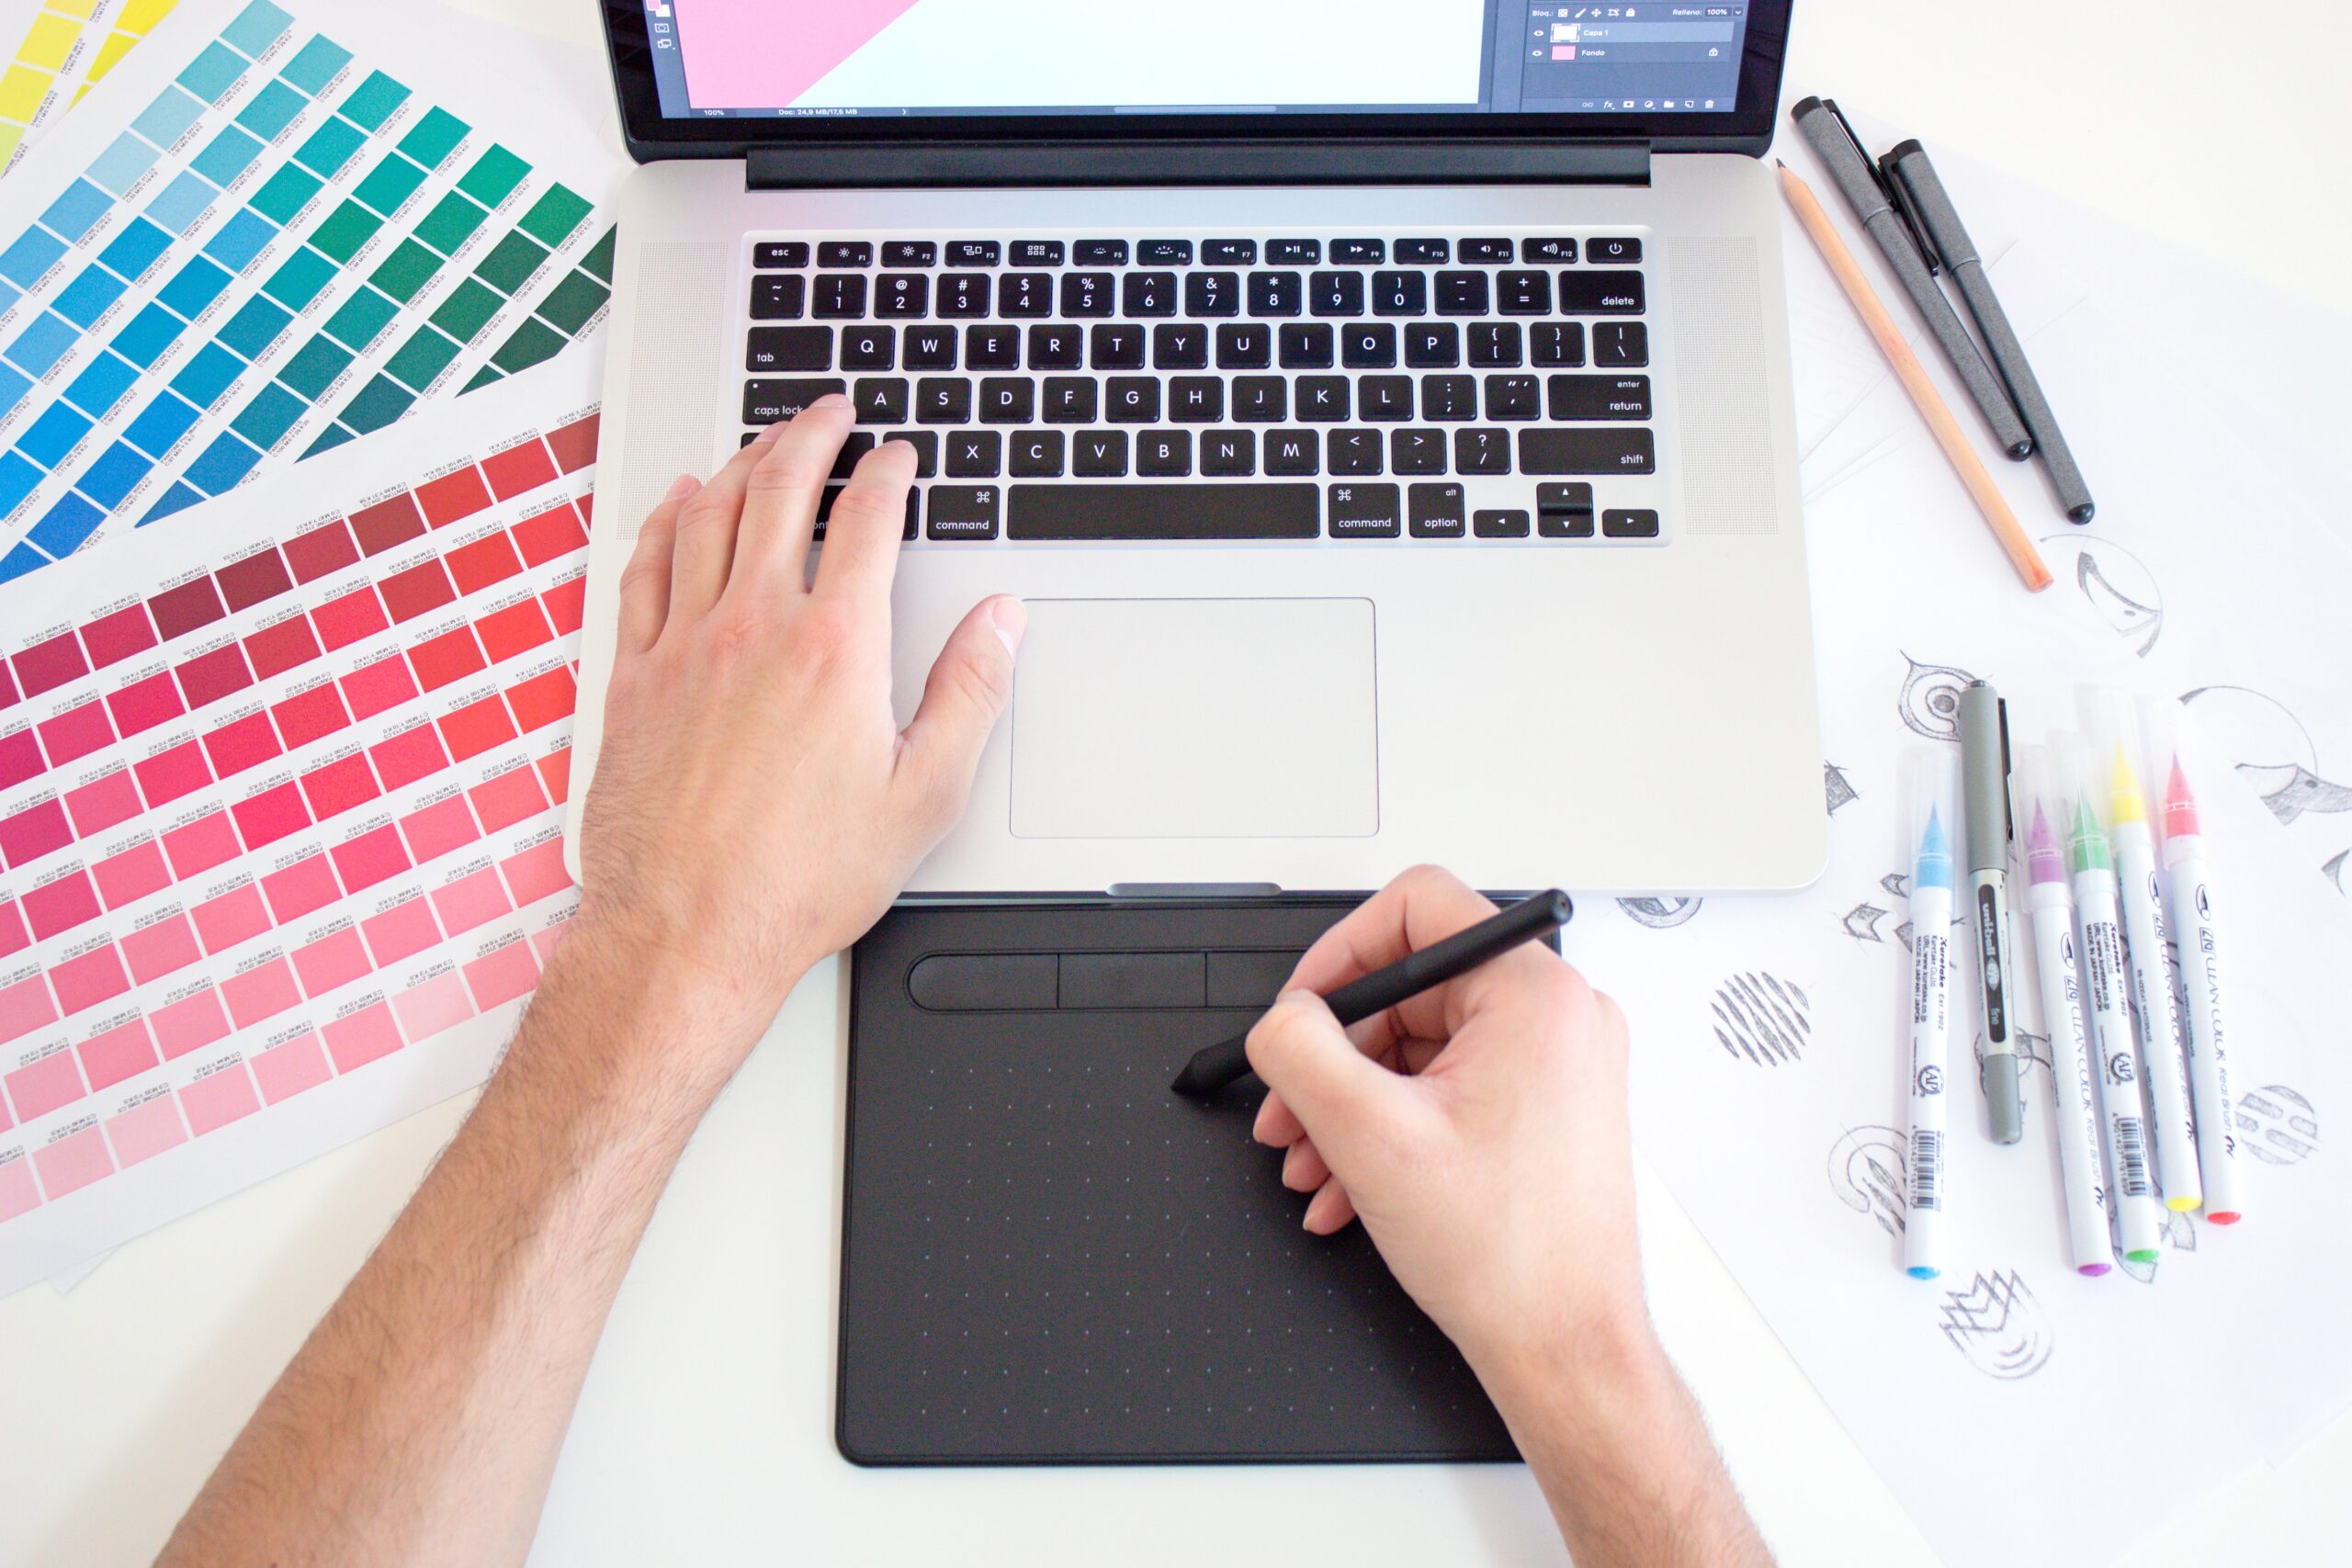 A graphic designer working with Pantone colors.